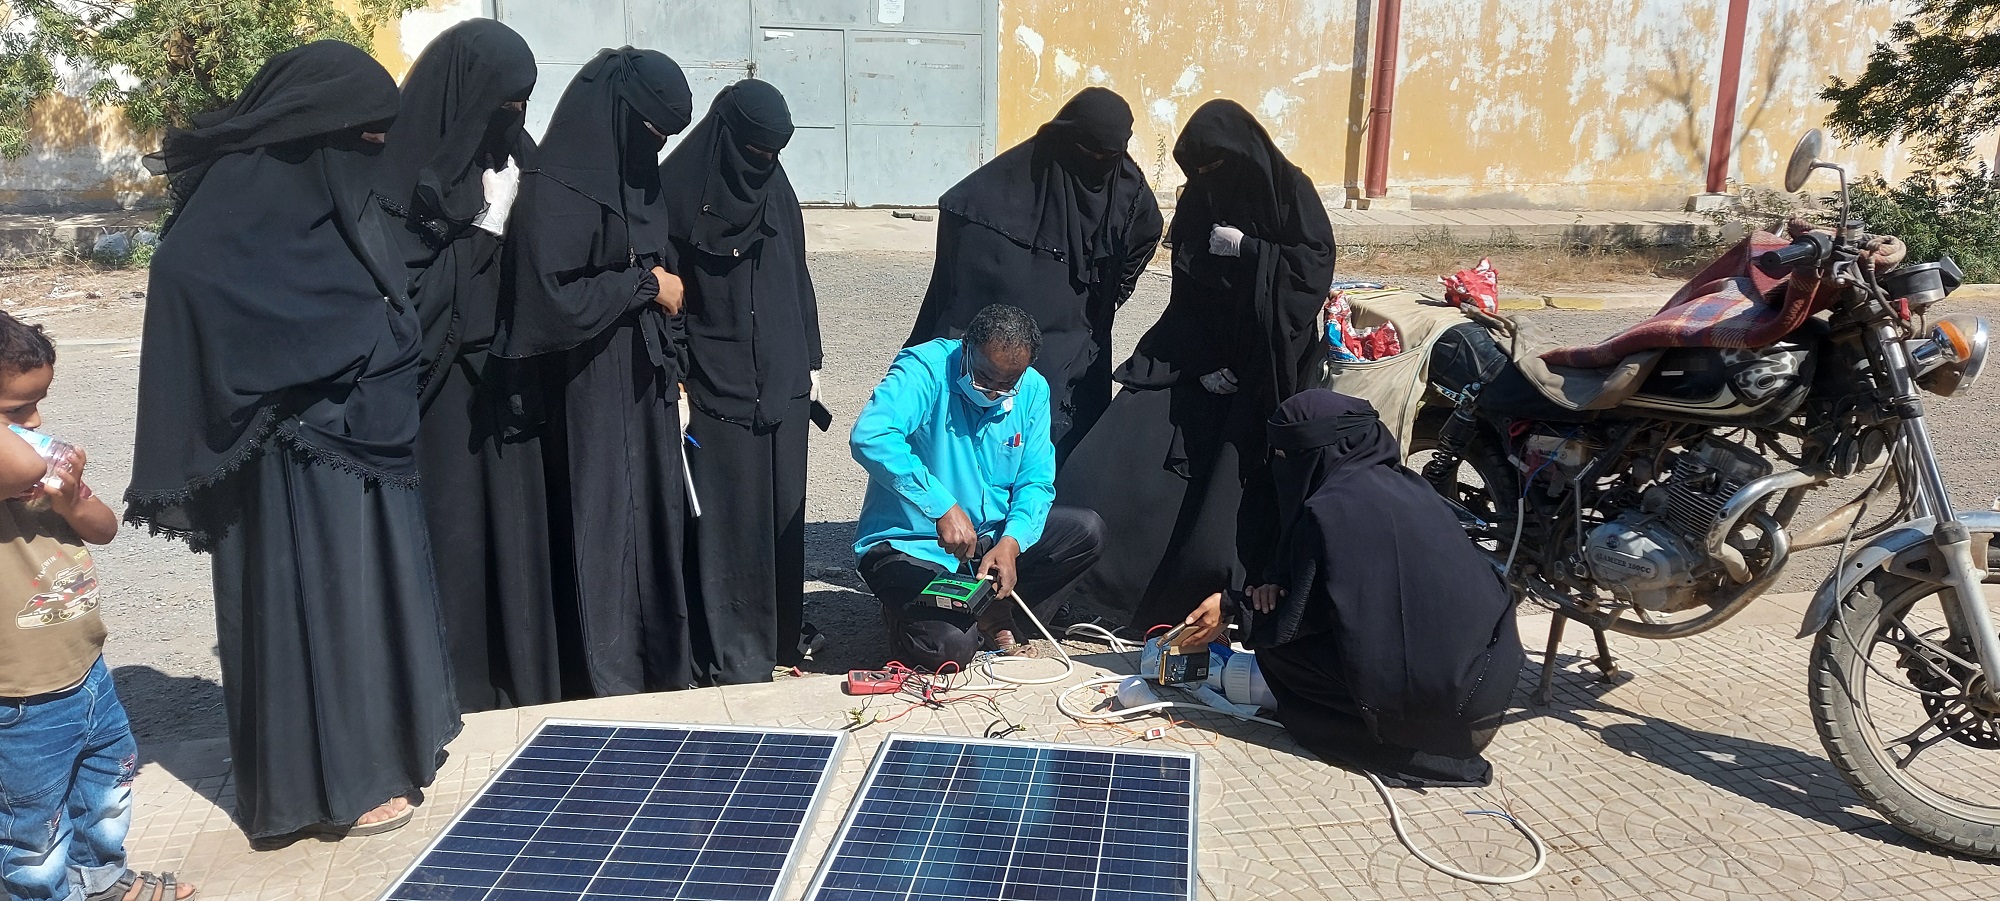 A group of women in black outfit watching a man working on a solar panel